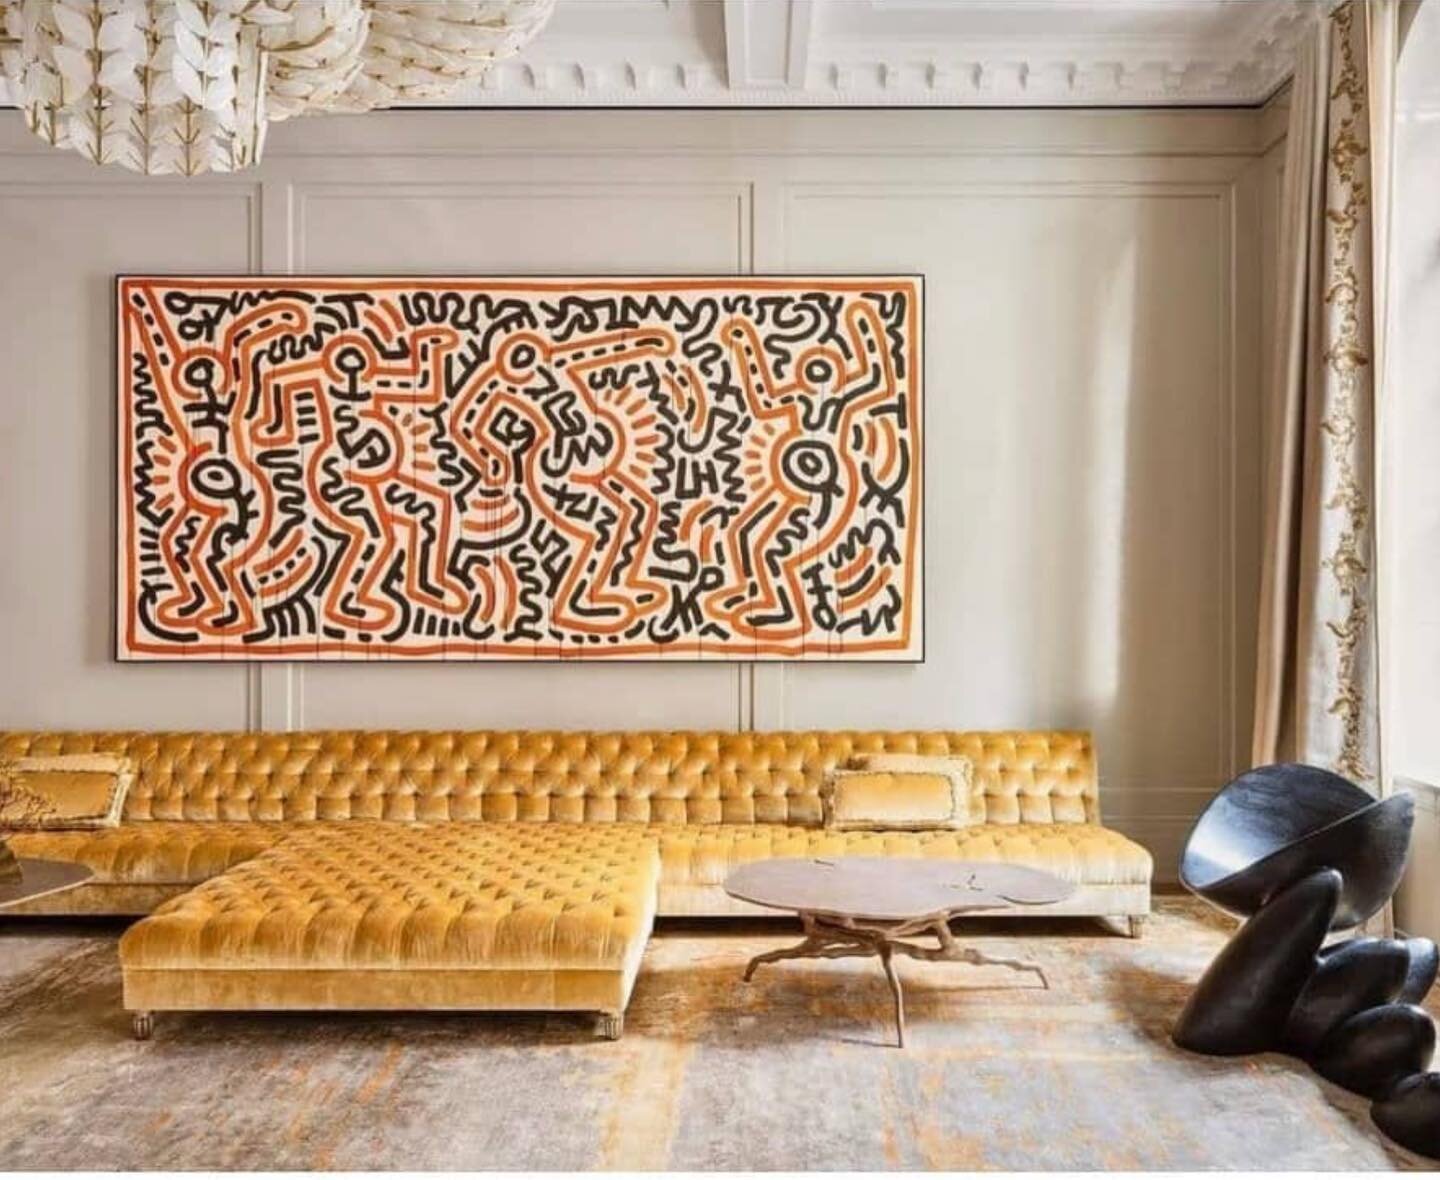 Fabulous Keith Haring ⁠💛
⁠
Via⁠
@larrys_list ⁠
@art_collectors_at_home⁠
⁠
#KeithHaring⁠
#theviewingroom #theviewingroomhk #consignmentart #interiordesign #contemporaryart #art #artconsignment #interior #artcollectors #privatecollection #design #livi